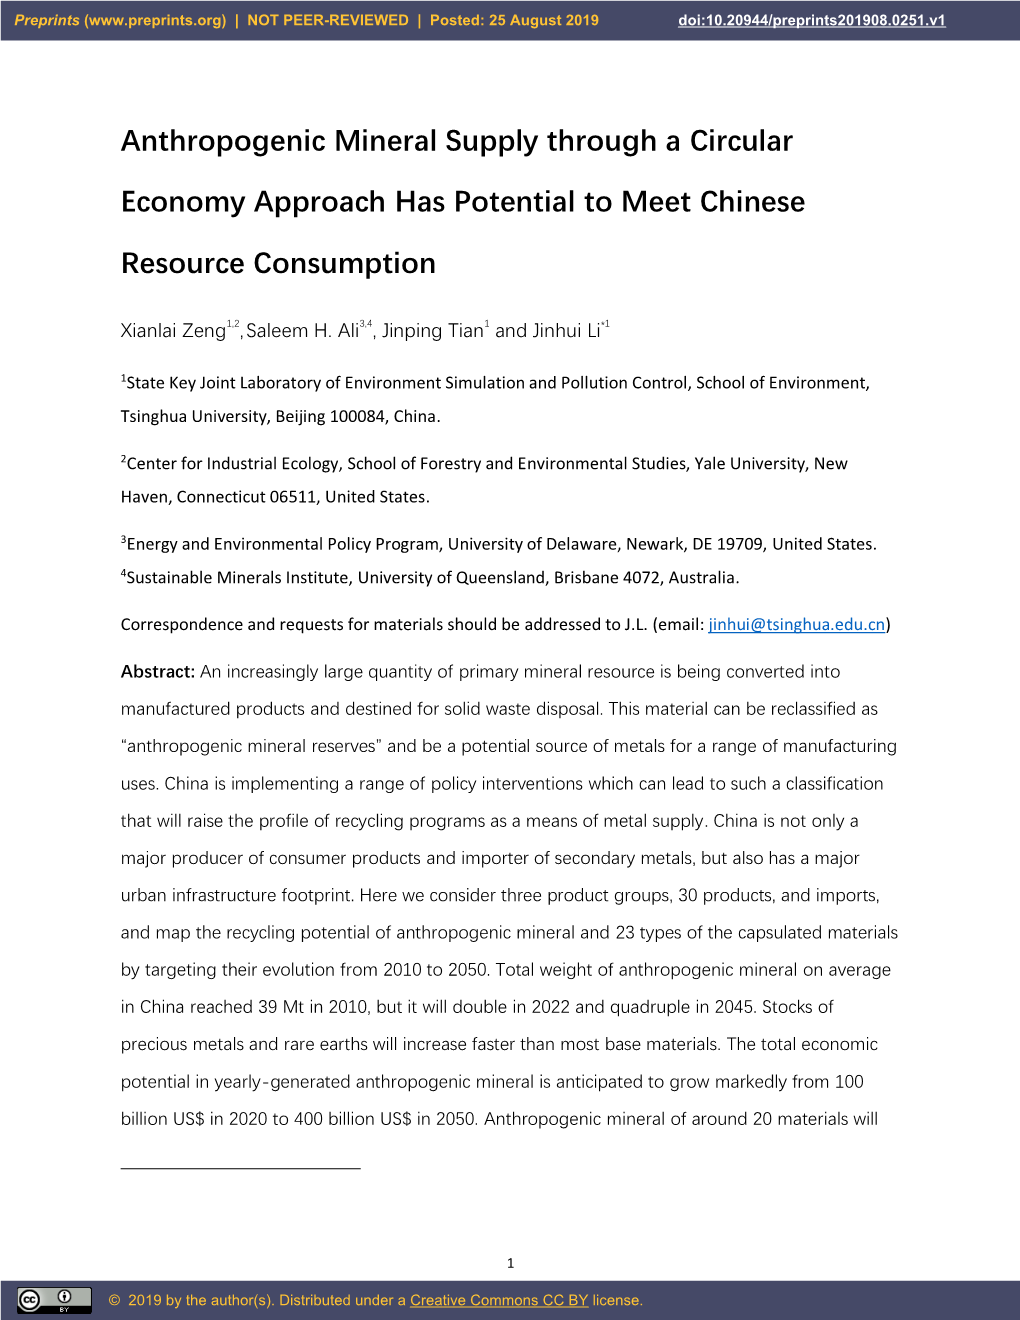 Anthropogenic Mineral Supply Through a Circular Economy Approach Has Potential to Meet Chinese Resource Consumption